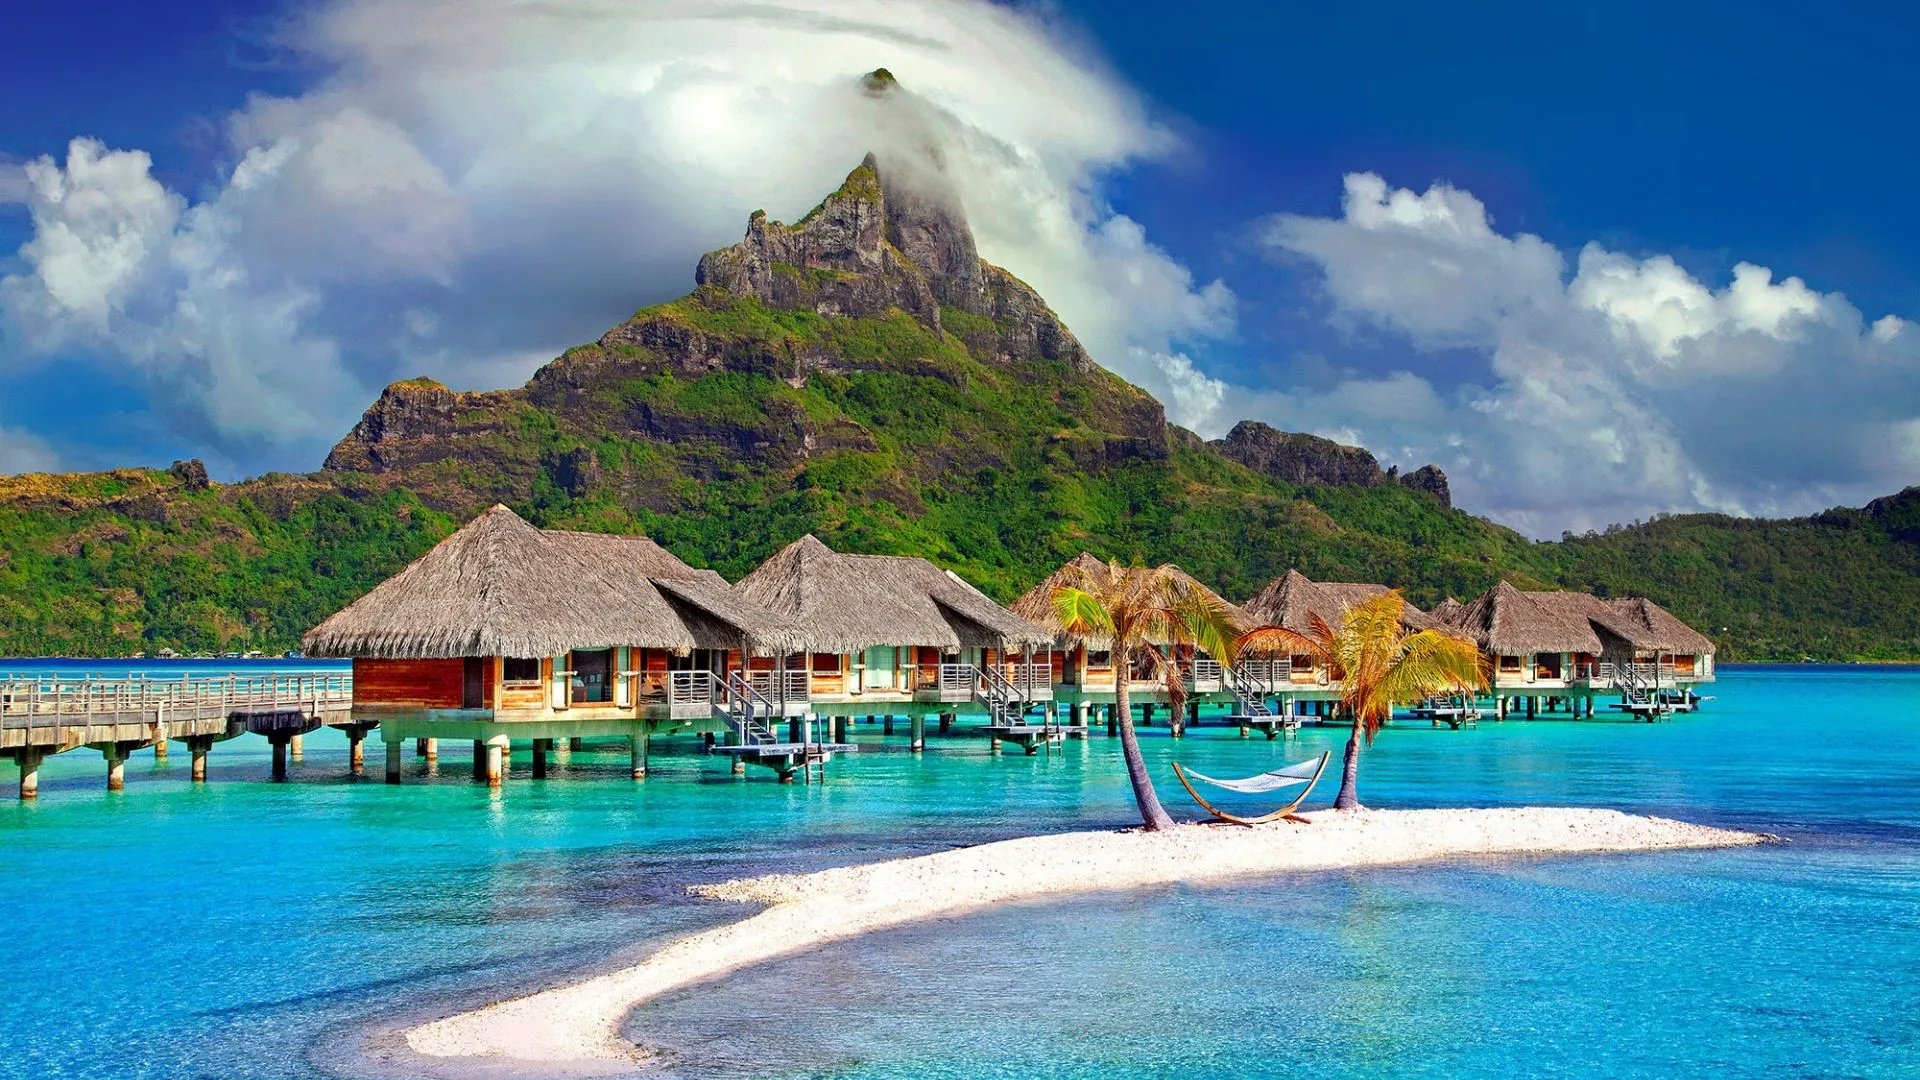 Sandals Royal Caribbean overwater bungalows in florida